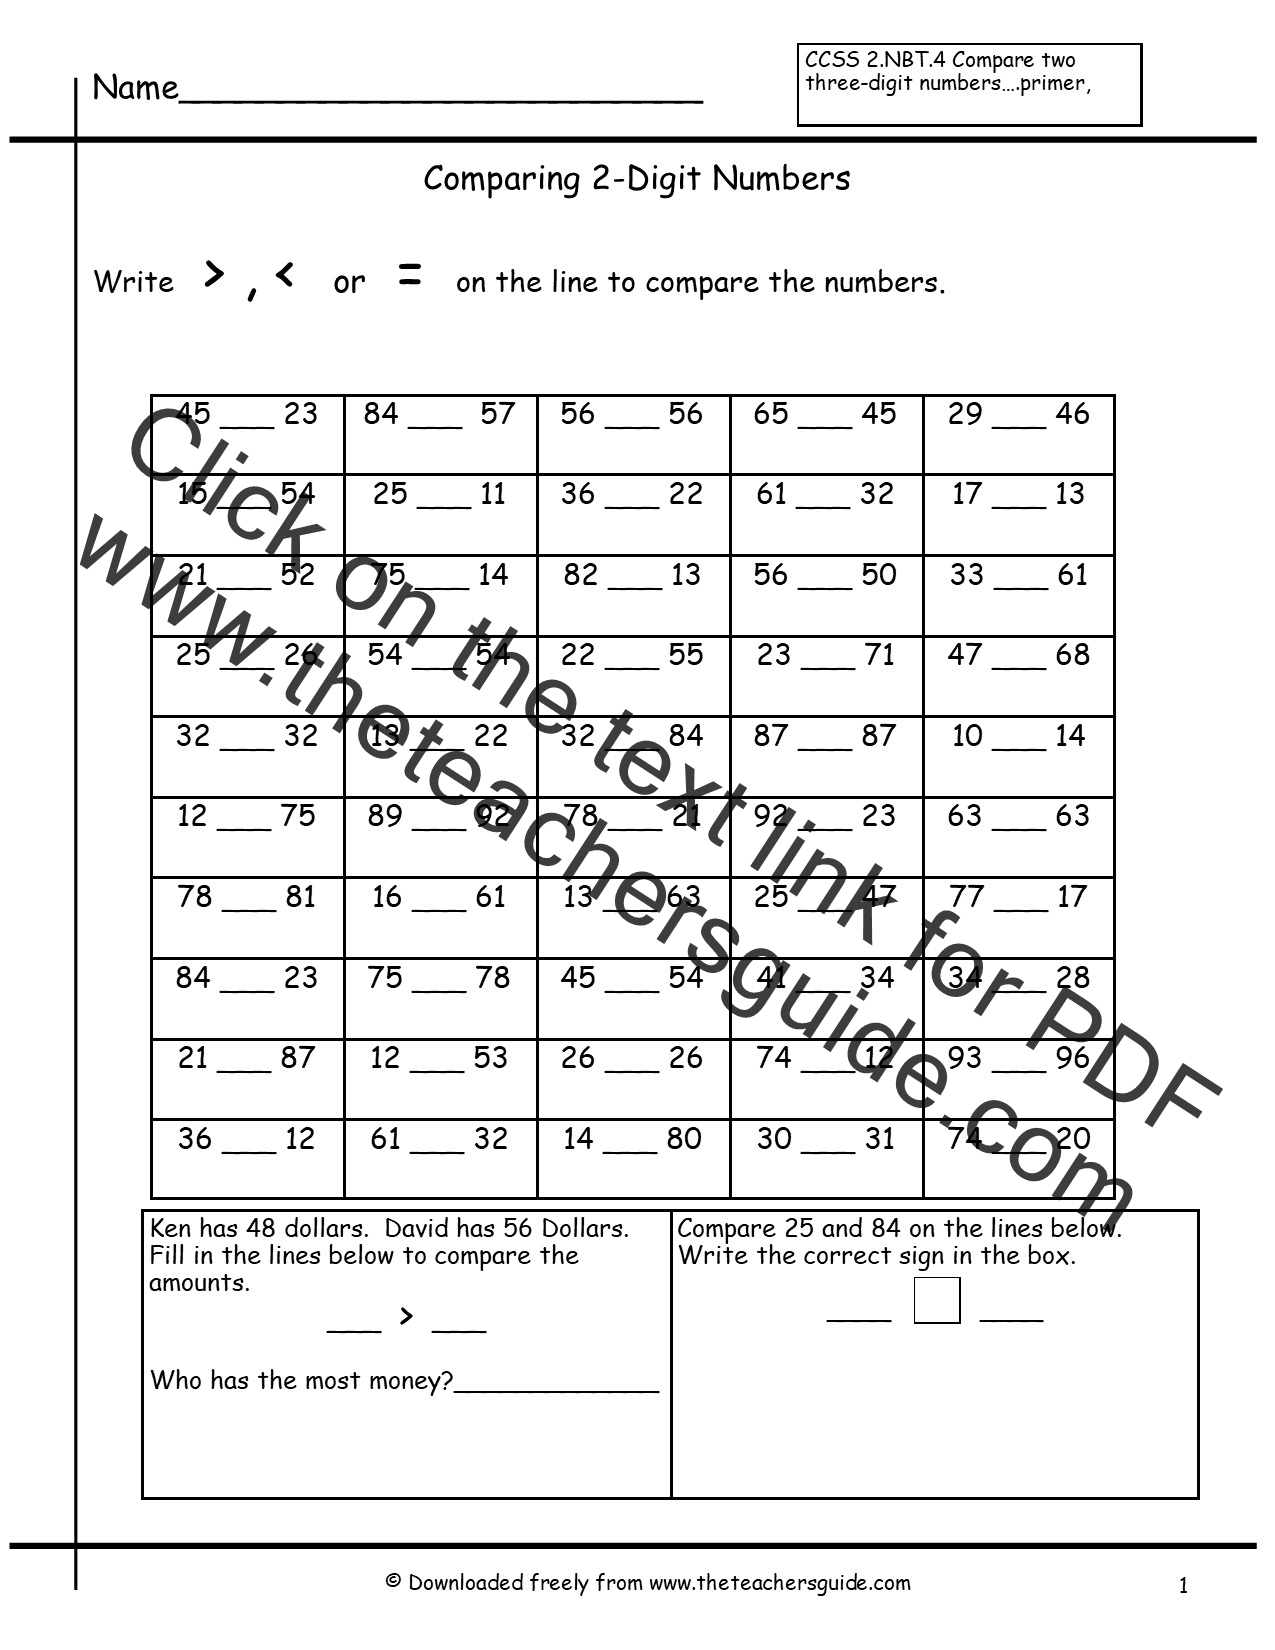 ordinal-numbers-worksheet-for-adults-uncategorized-resume-examples